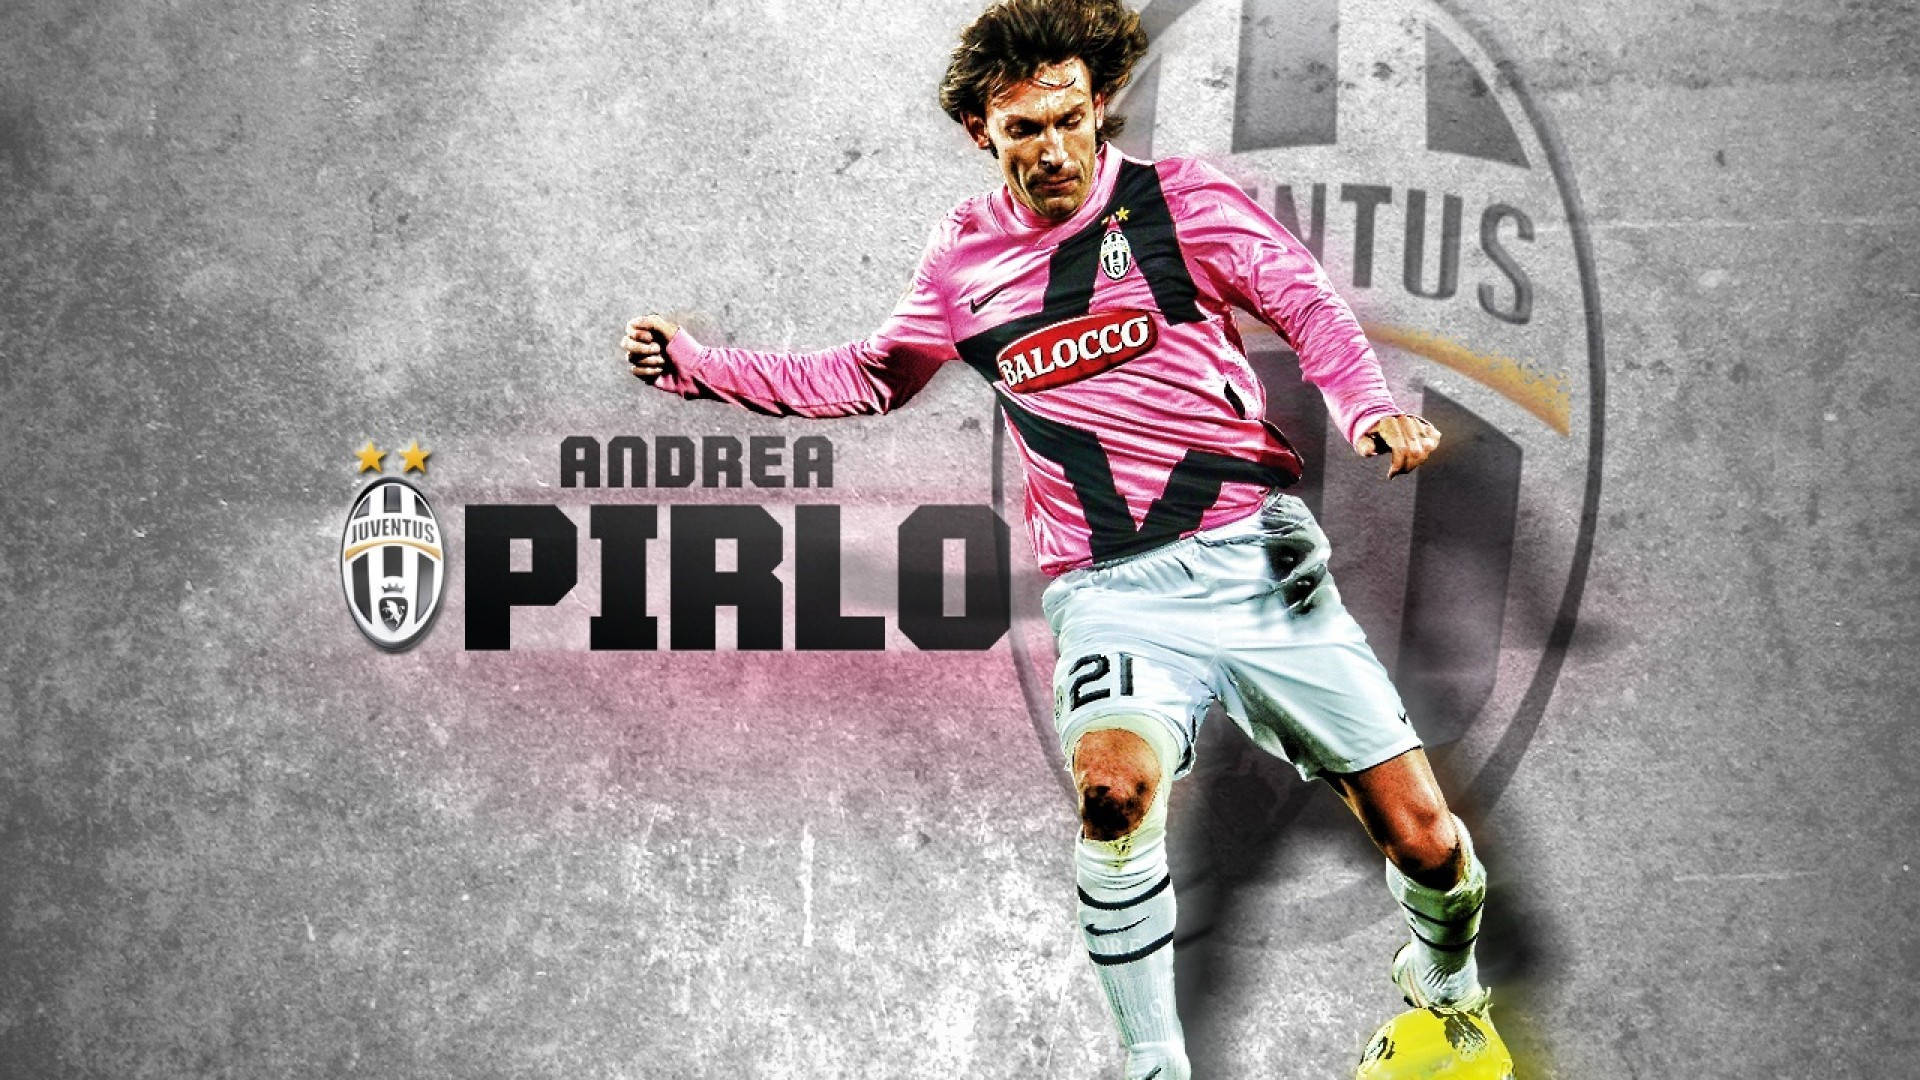 Andrea Pirlo Balocco Juventus Jersey Background